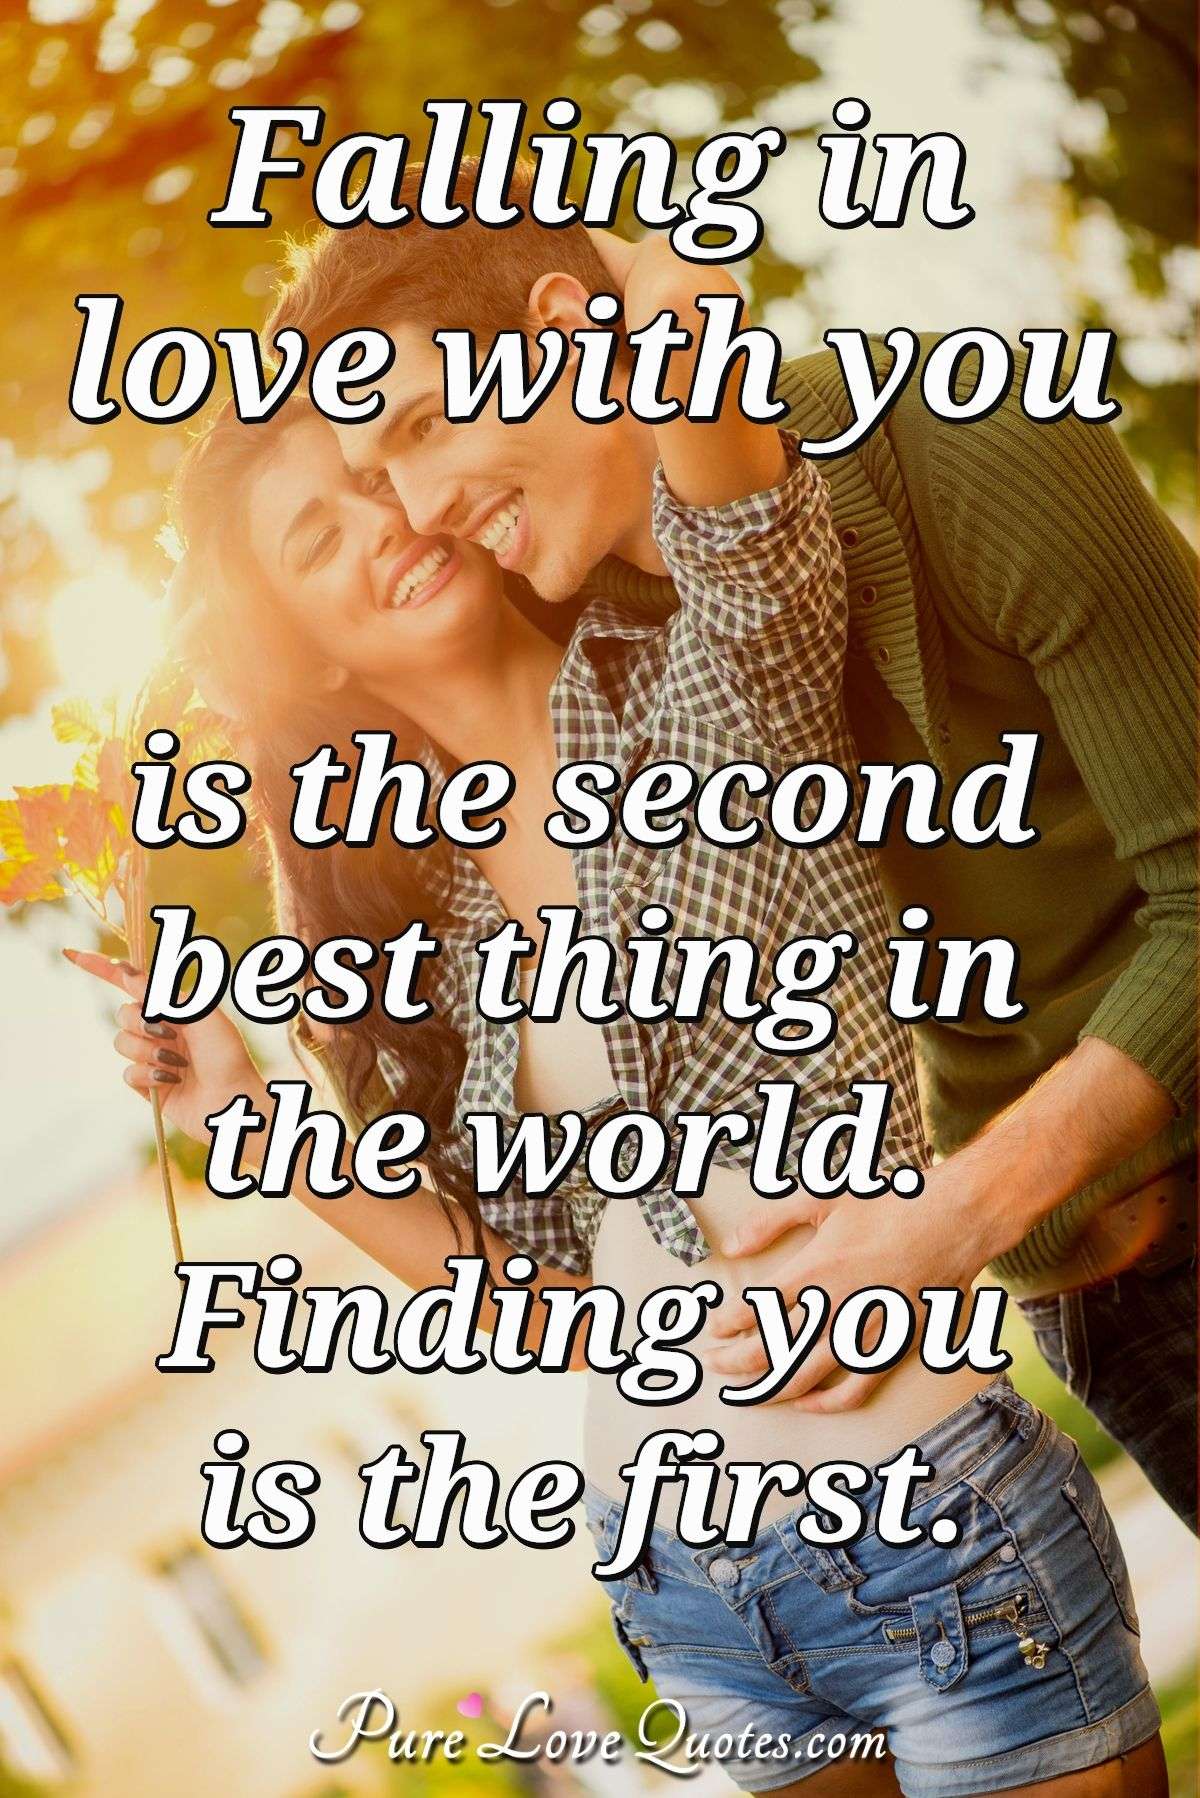 Falling in love with you is the second best thing in the world. Finding you is the first. - Anonymous